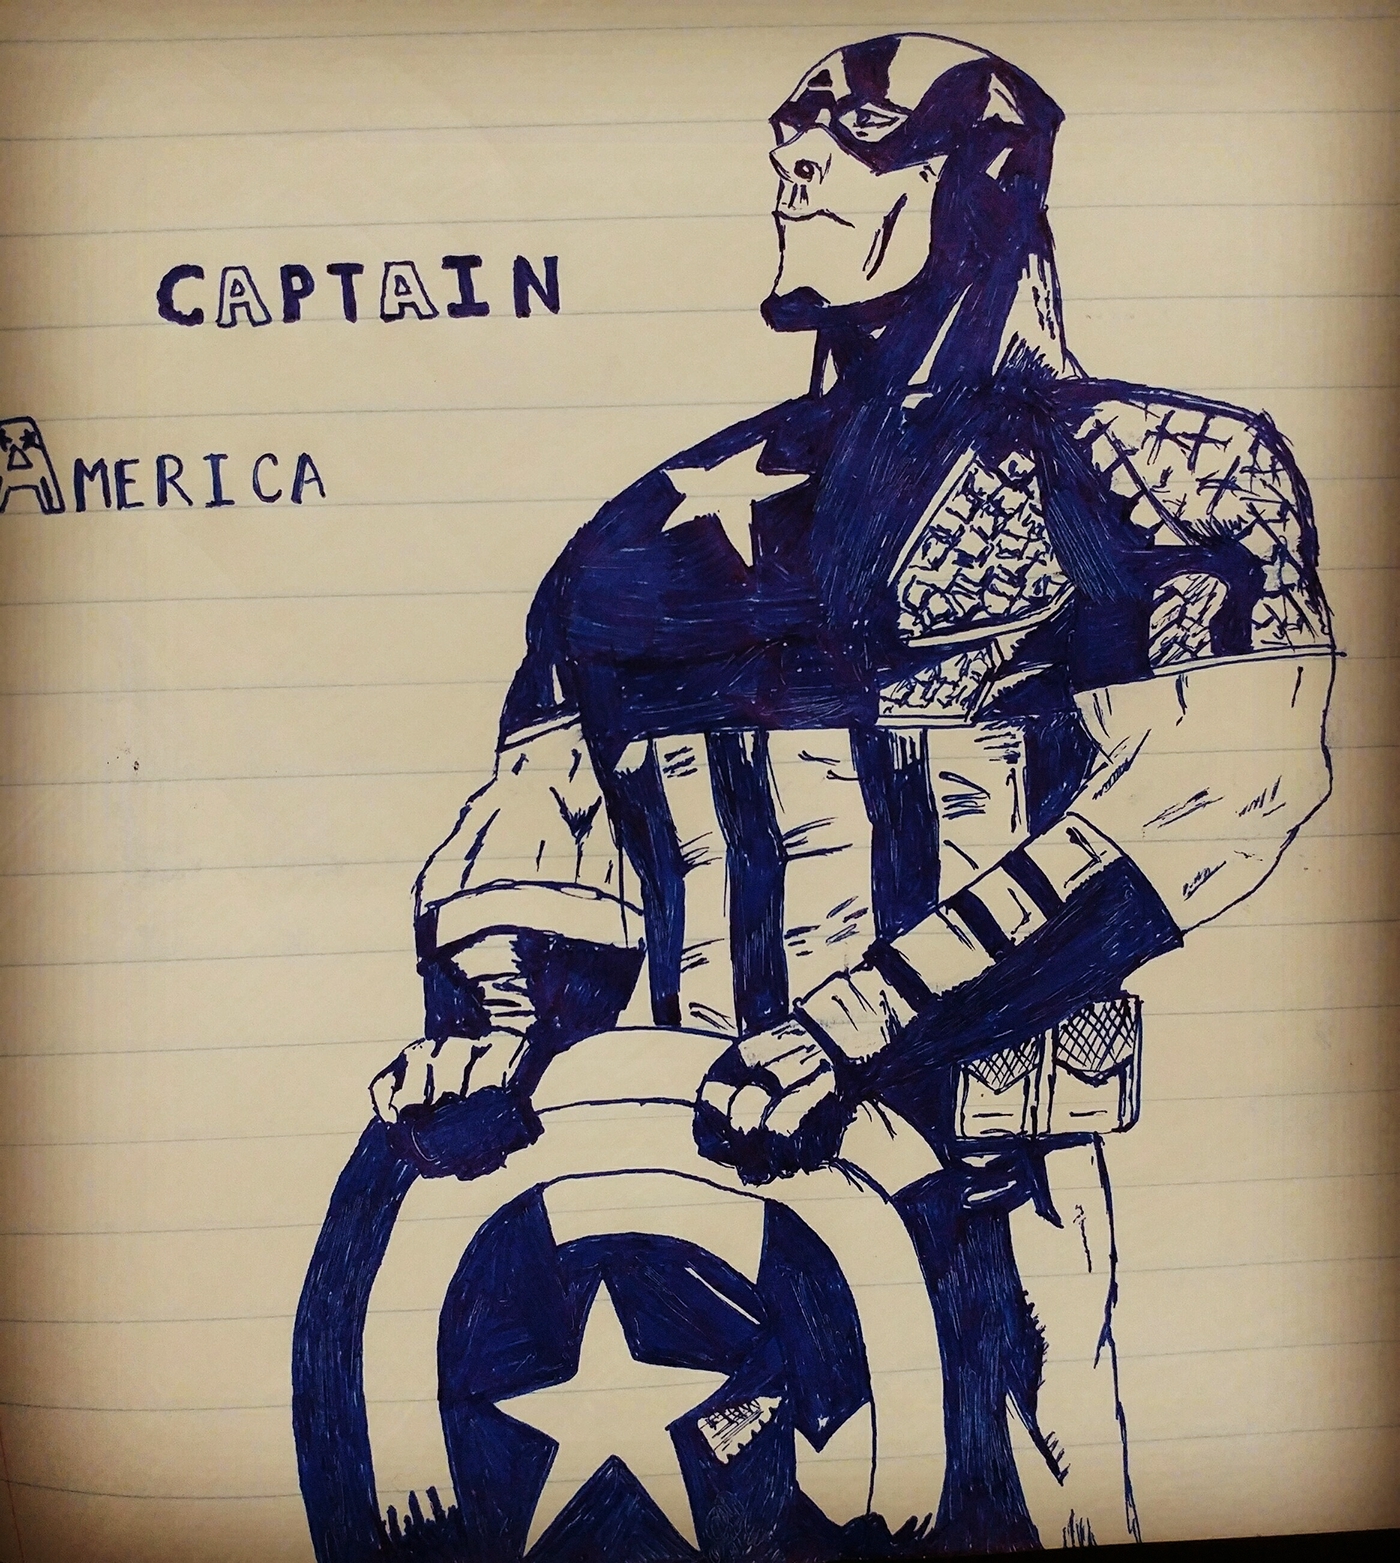 Based on the Marvel stories I used to like the movie Avengers and many others. Finally thought of putting few heroes in my drawing book. So came up with Captain America and Iron Man.